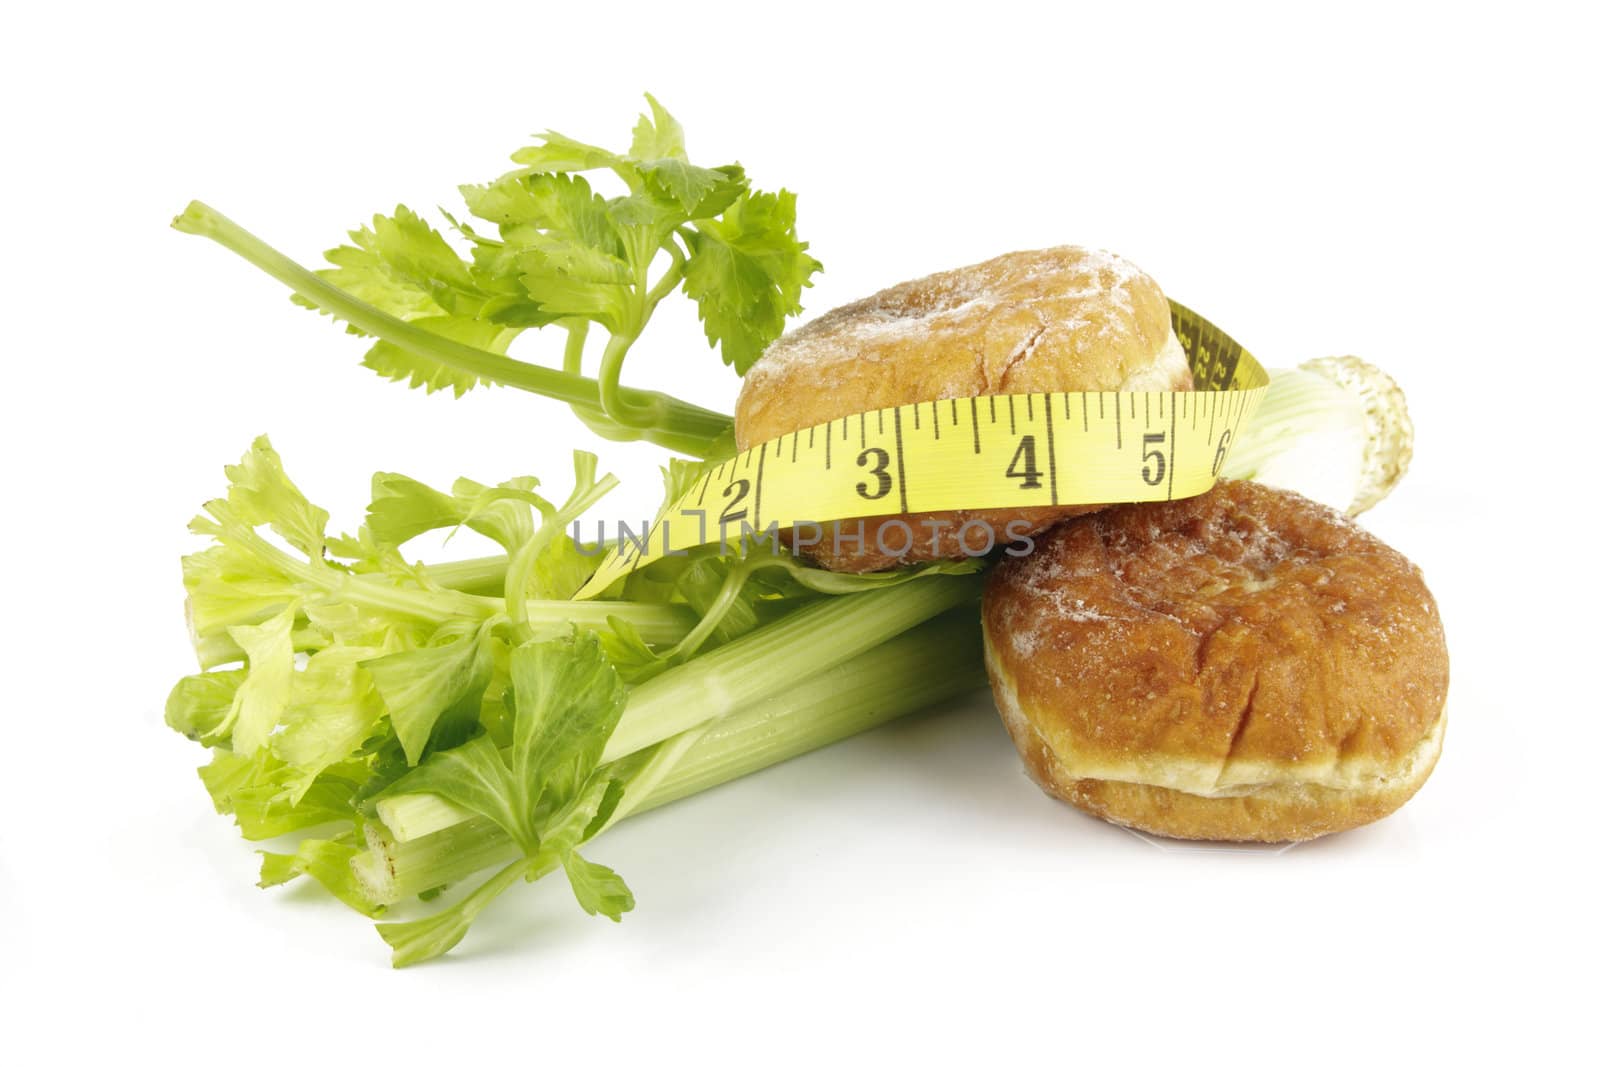 Contradiction between healthy food and junk food using celery and jam doughnut with a yellow tape measure on a reflective white background 